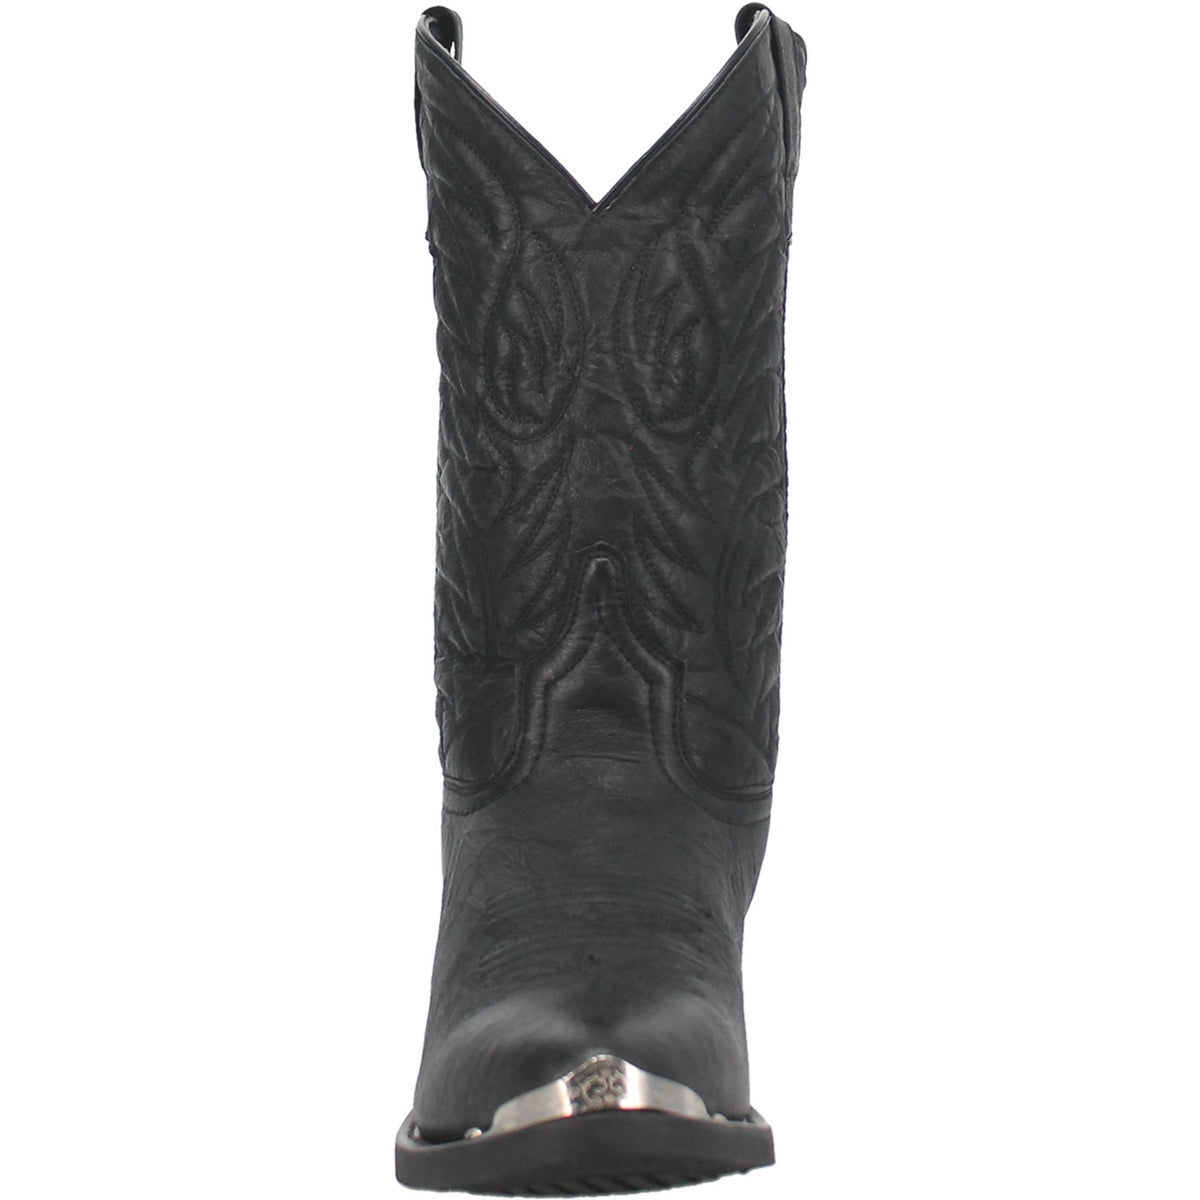 EAST BOUND LEATHER BOOT Cover